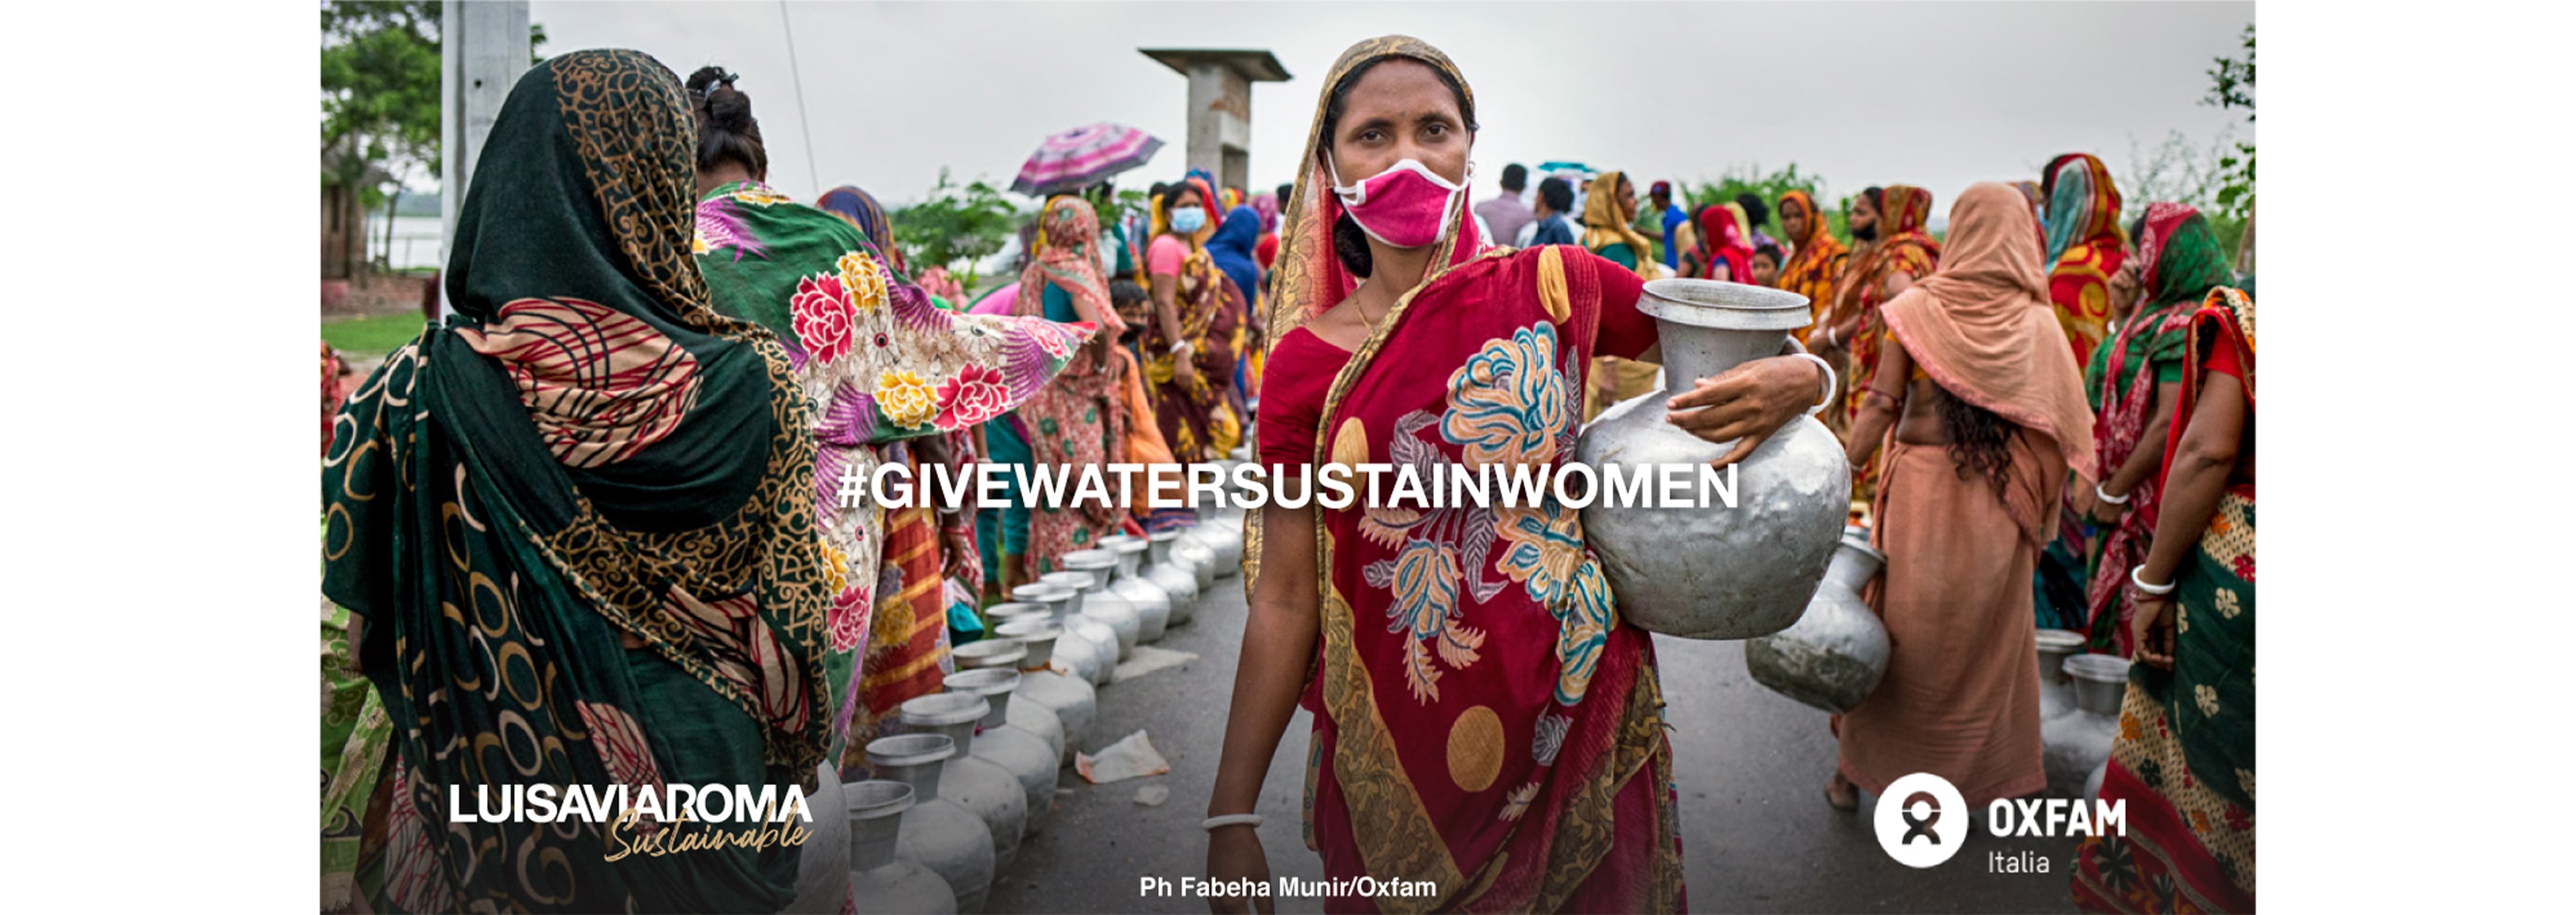 LVRSustainable & Oxfam Italy for Give Water, Sustain Women: プロジェクト報告